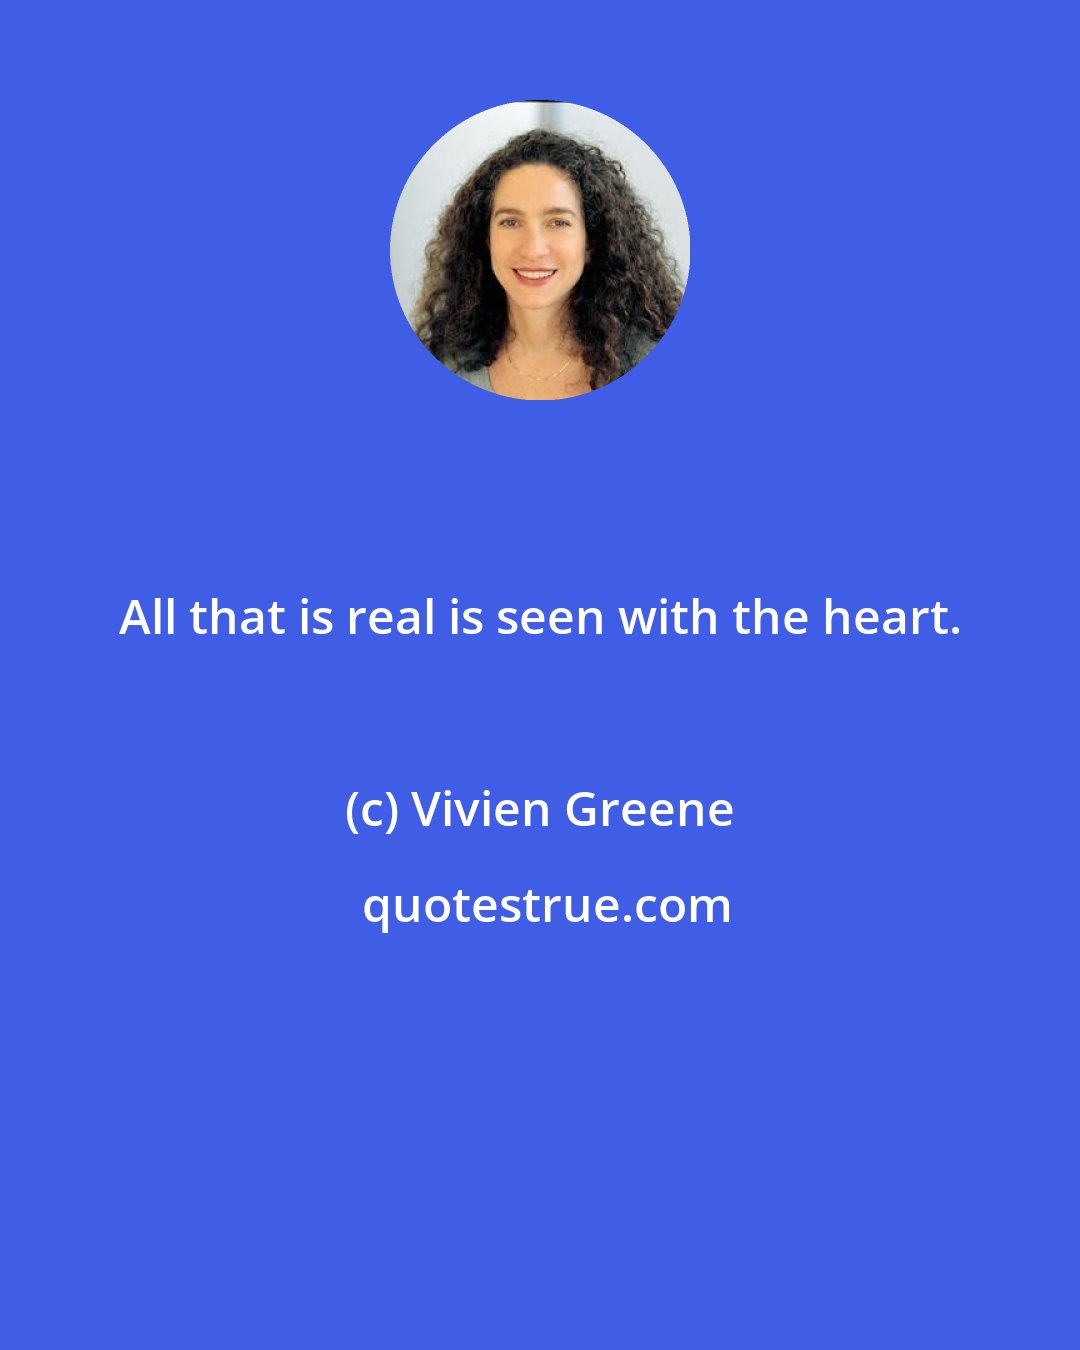 Vivien Greene: All that is real is seen with the heart.